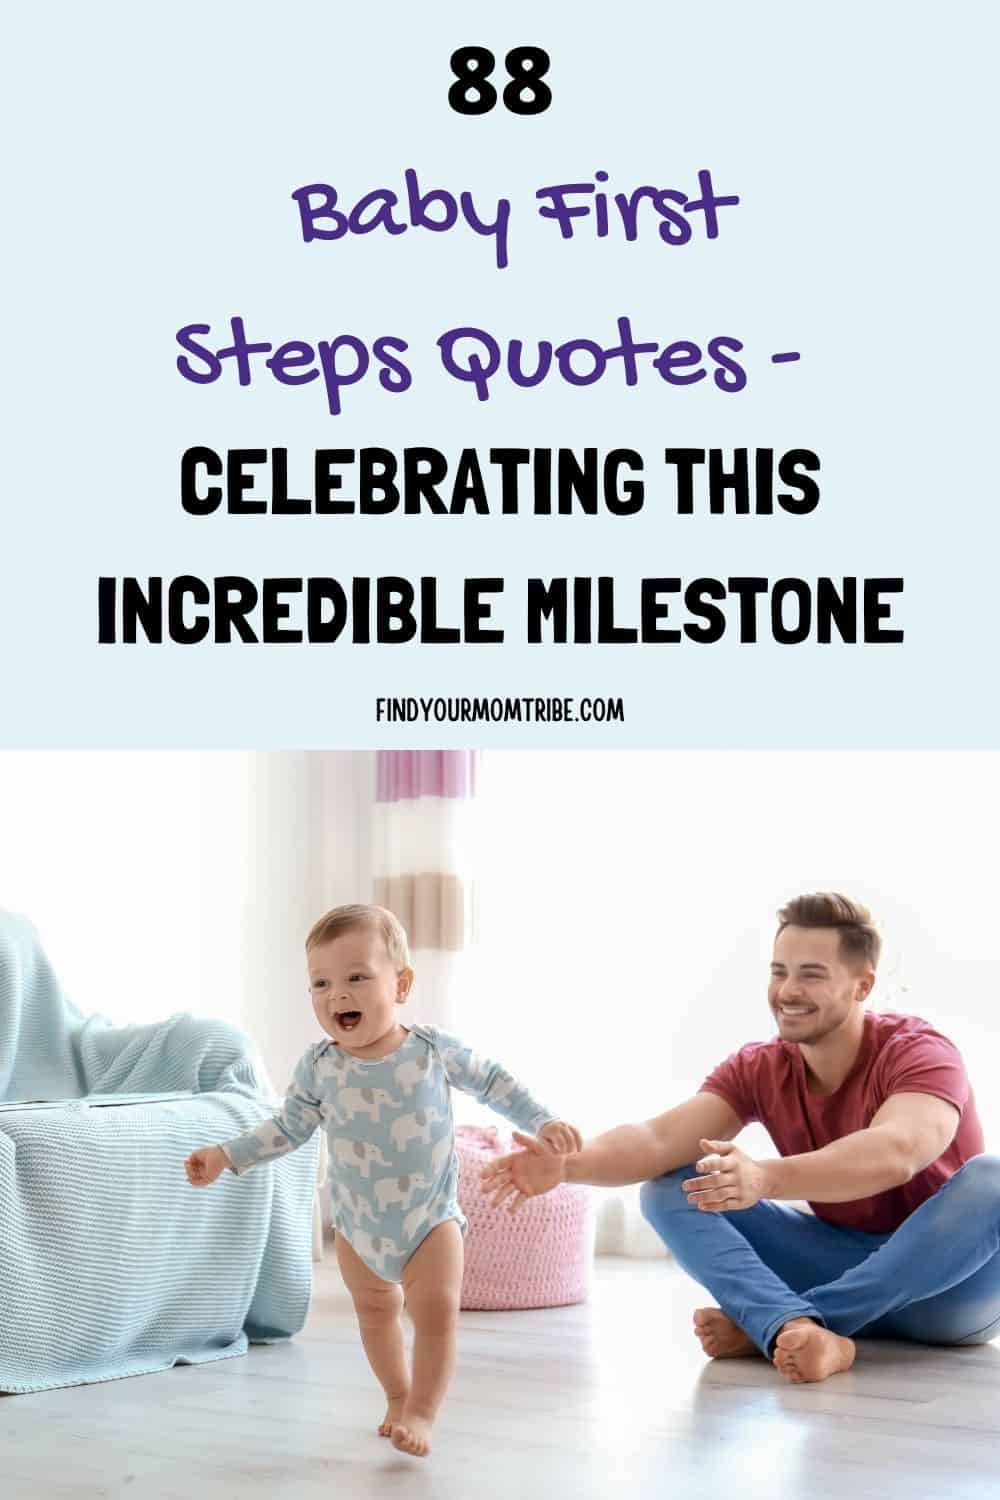 Baby First Steps Quotes Celebrating This Incredible Milestone